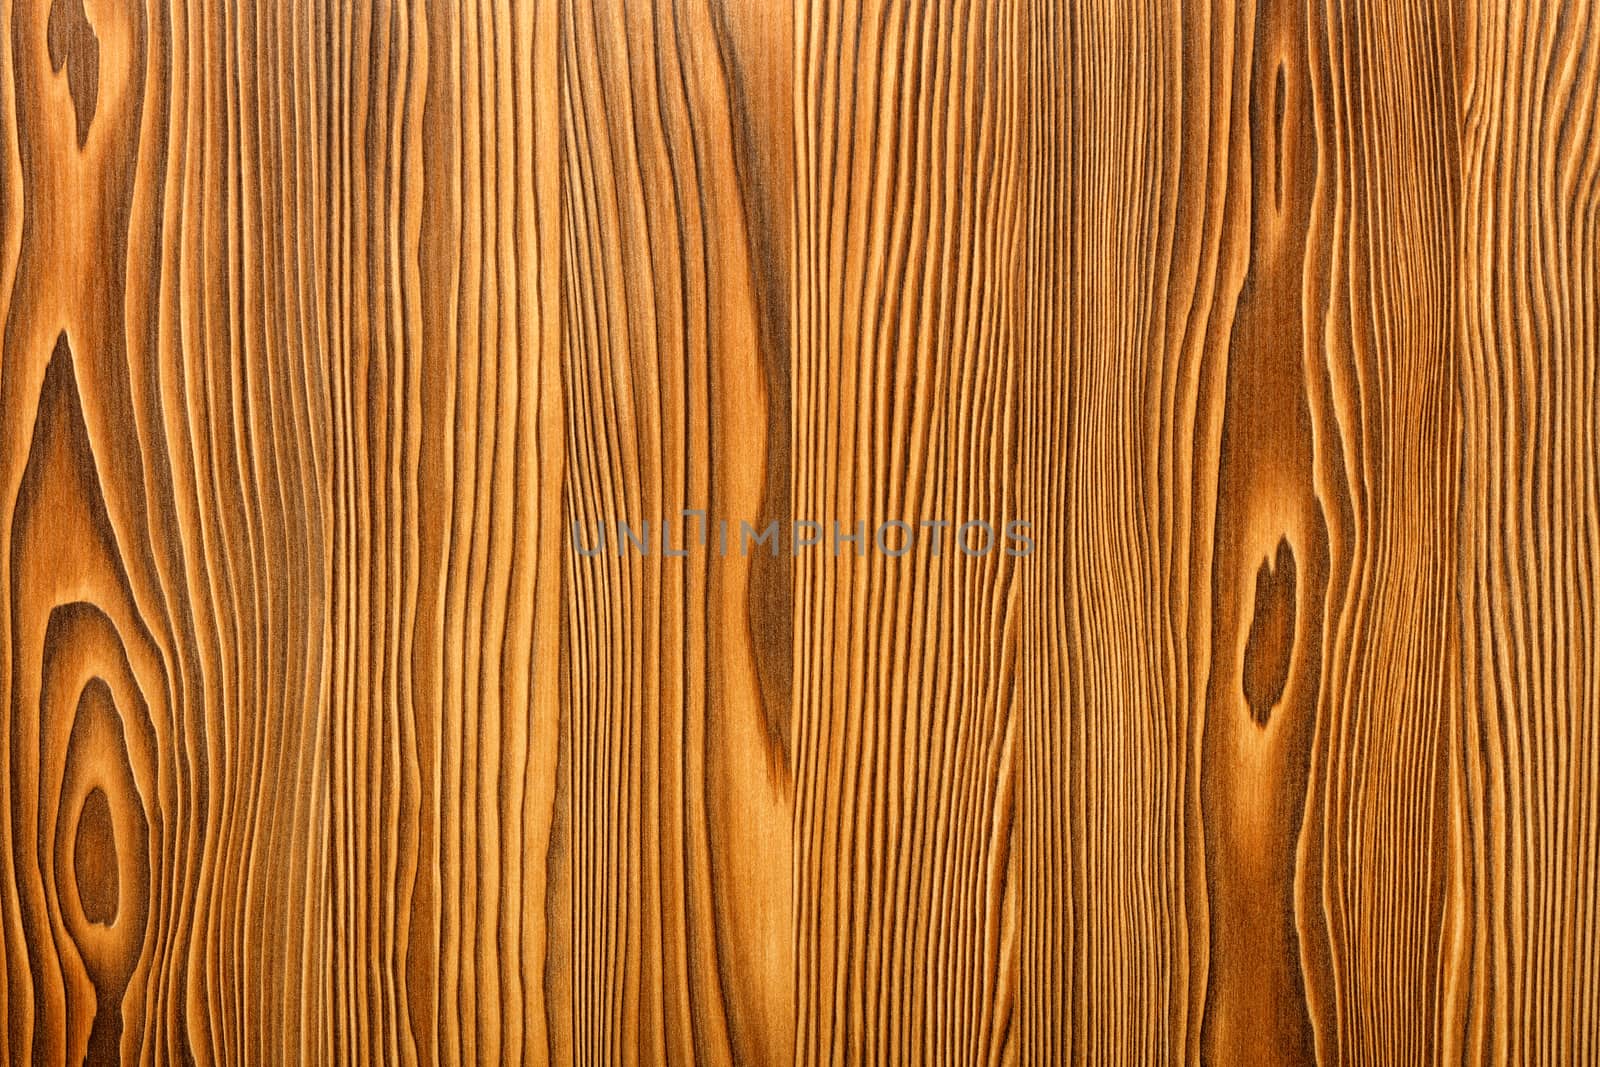 A beautiful pattern of wood fibers in the form of a new smooth wooden veneer with vertical guides.